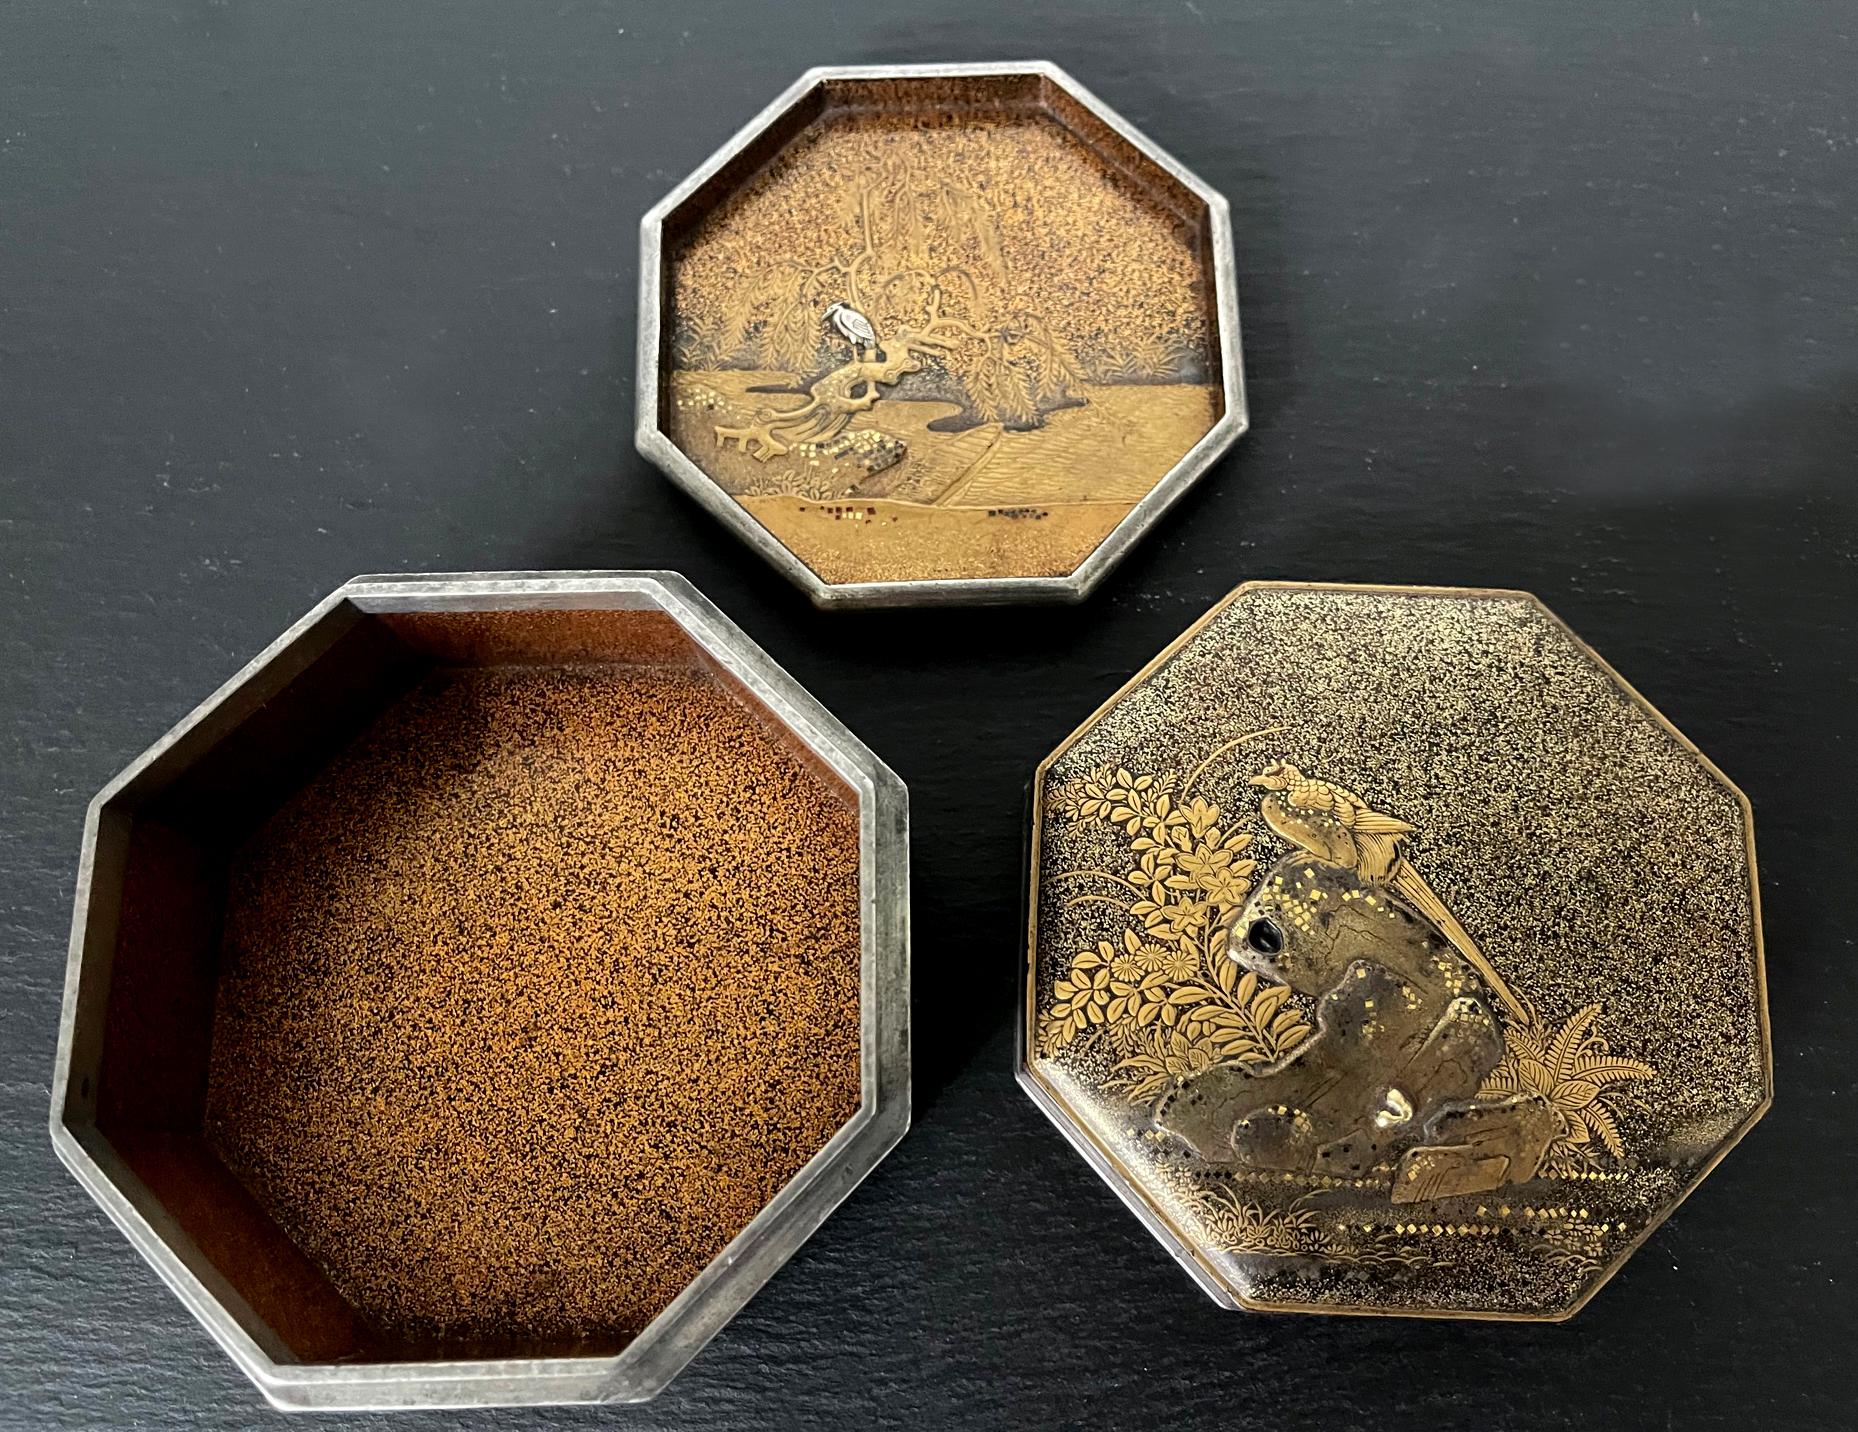 An early Japanese lacquer kobako (small box) in octagon shape circa 16th-17th century (late Muromachi to Momoyama period). This kobako was possibly used as a kogo to store incense. It features an inner tray and silver metal rim. The execution of the